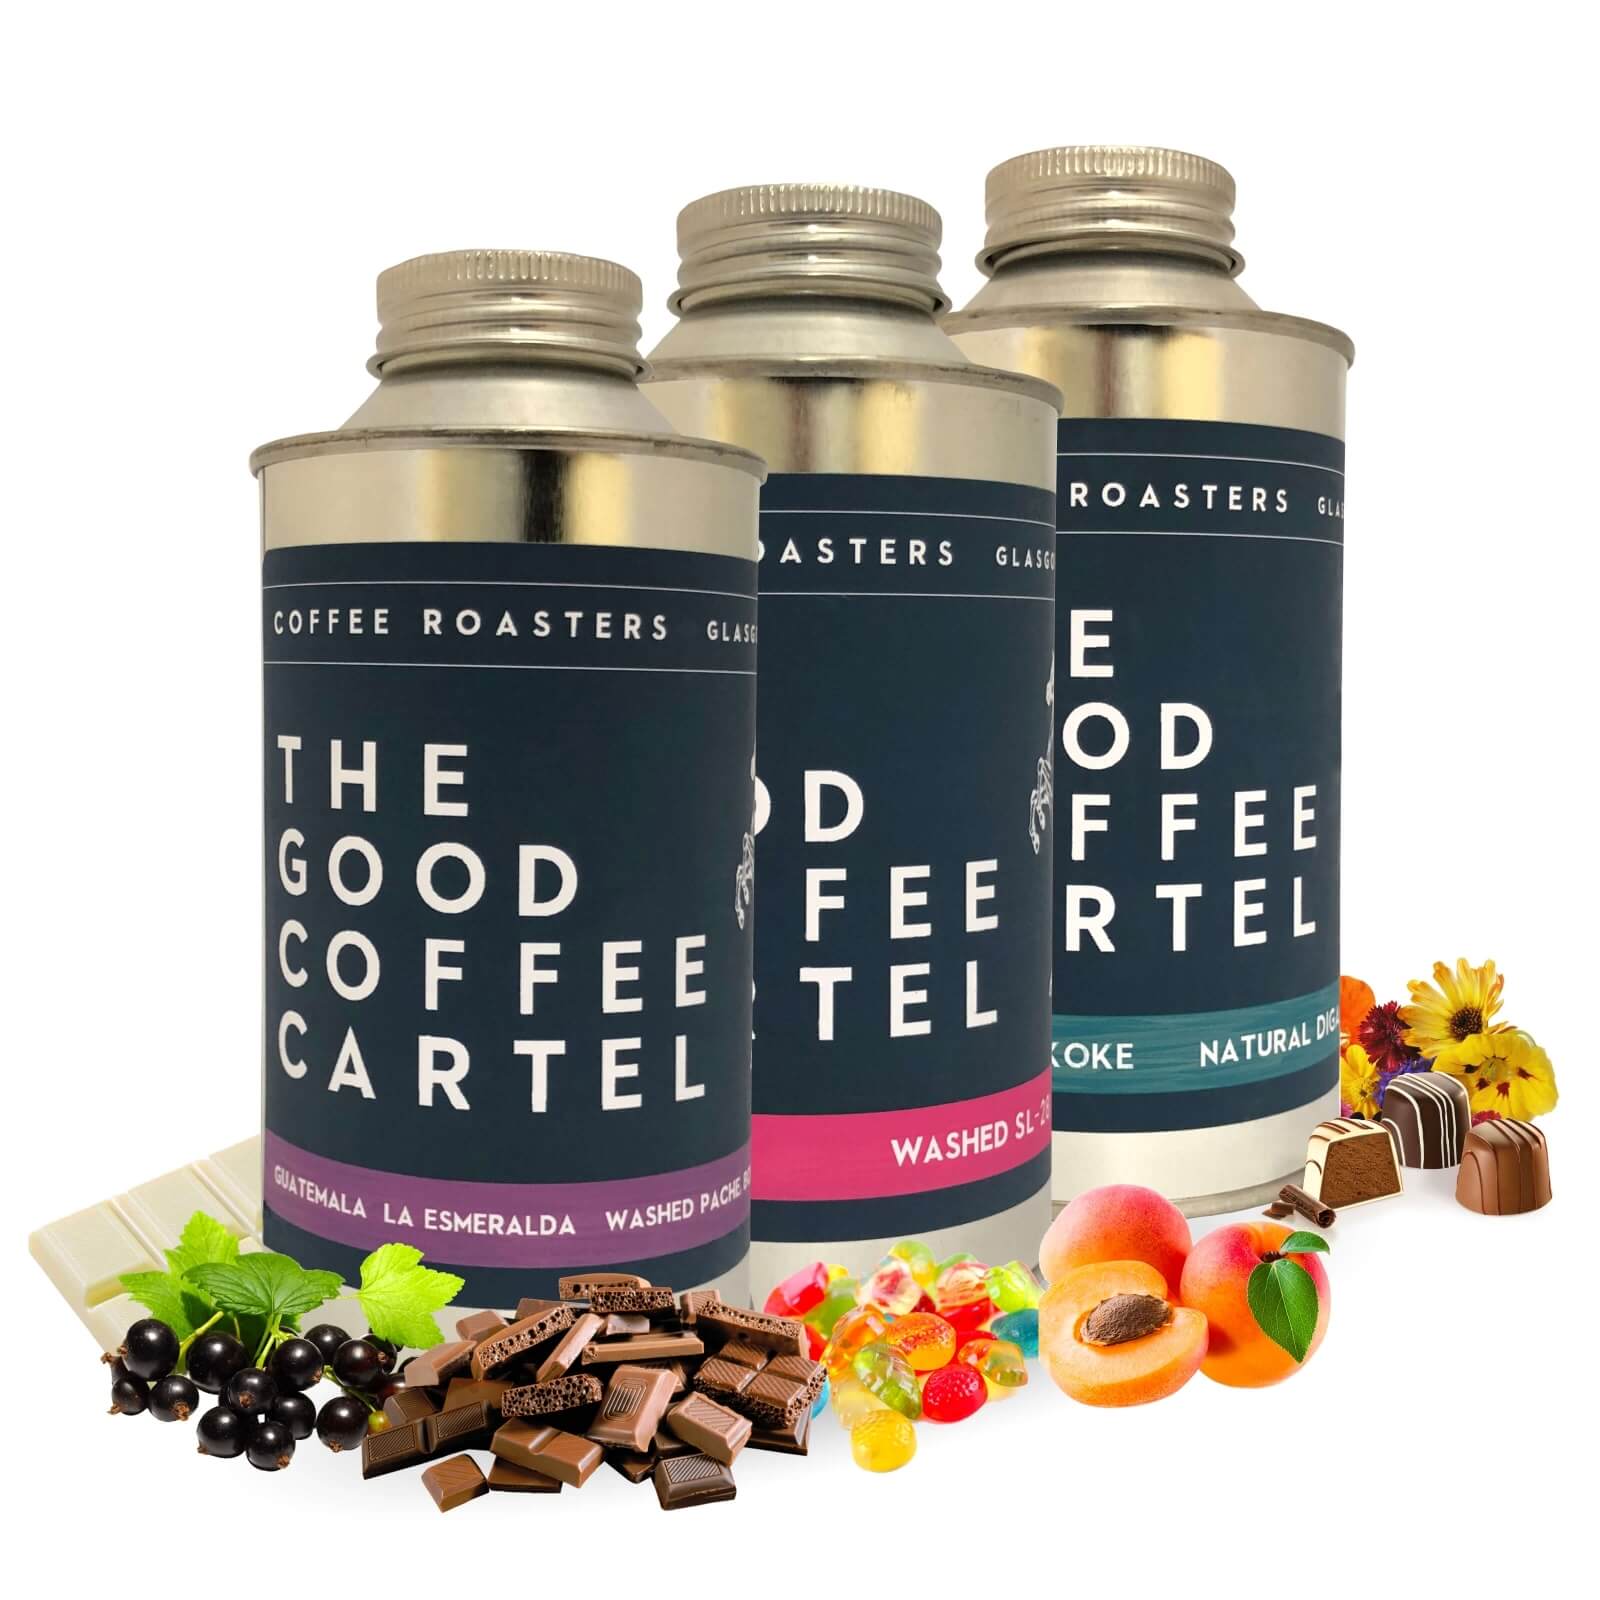 Specialty coffee The Good Coffee Cartel 3PACK - The Good Coffee Cartel